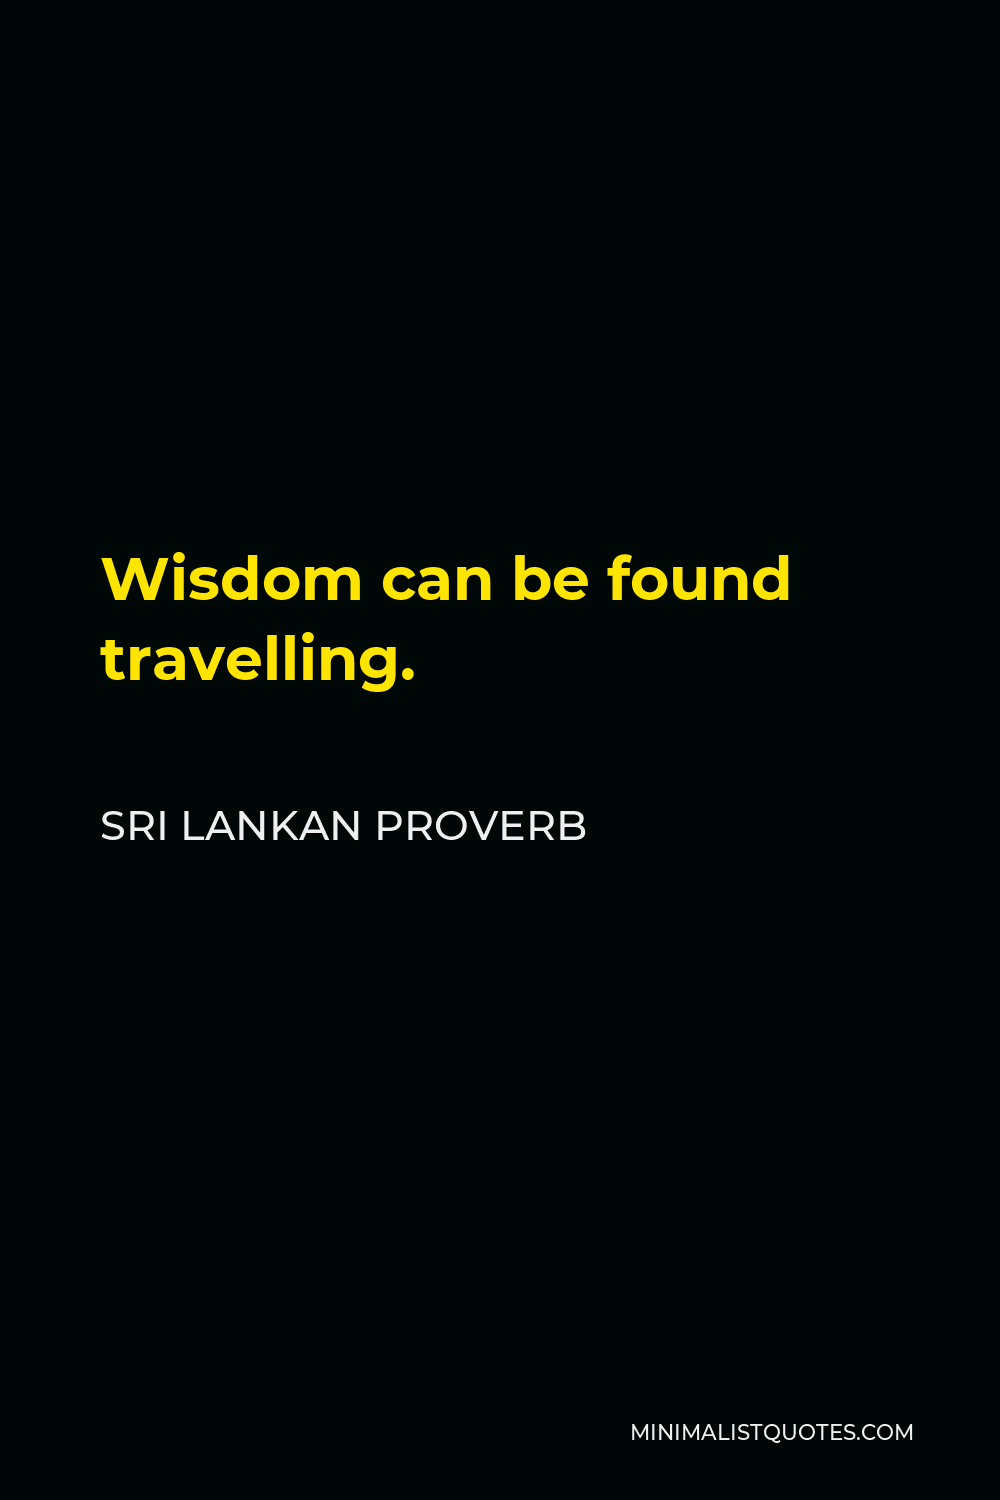 Sri Lankan Proverb Quote - Wisdom can be found travelling.